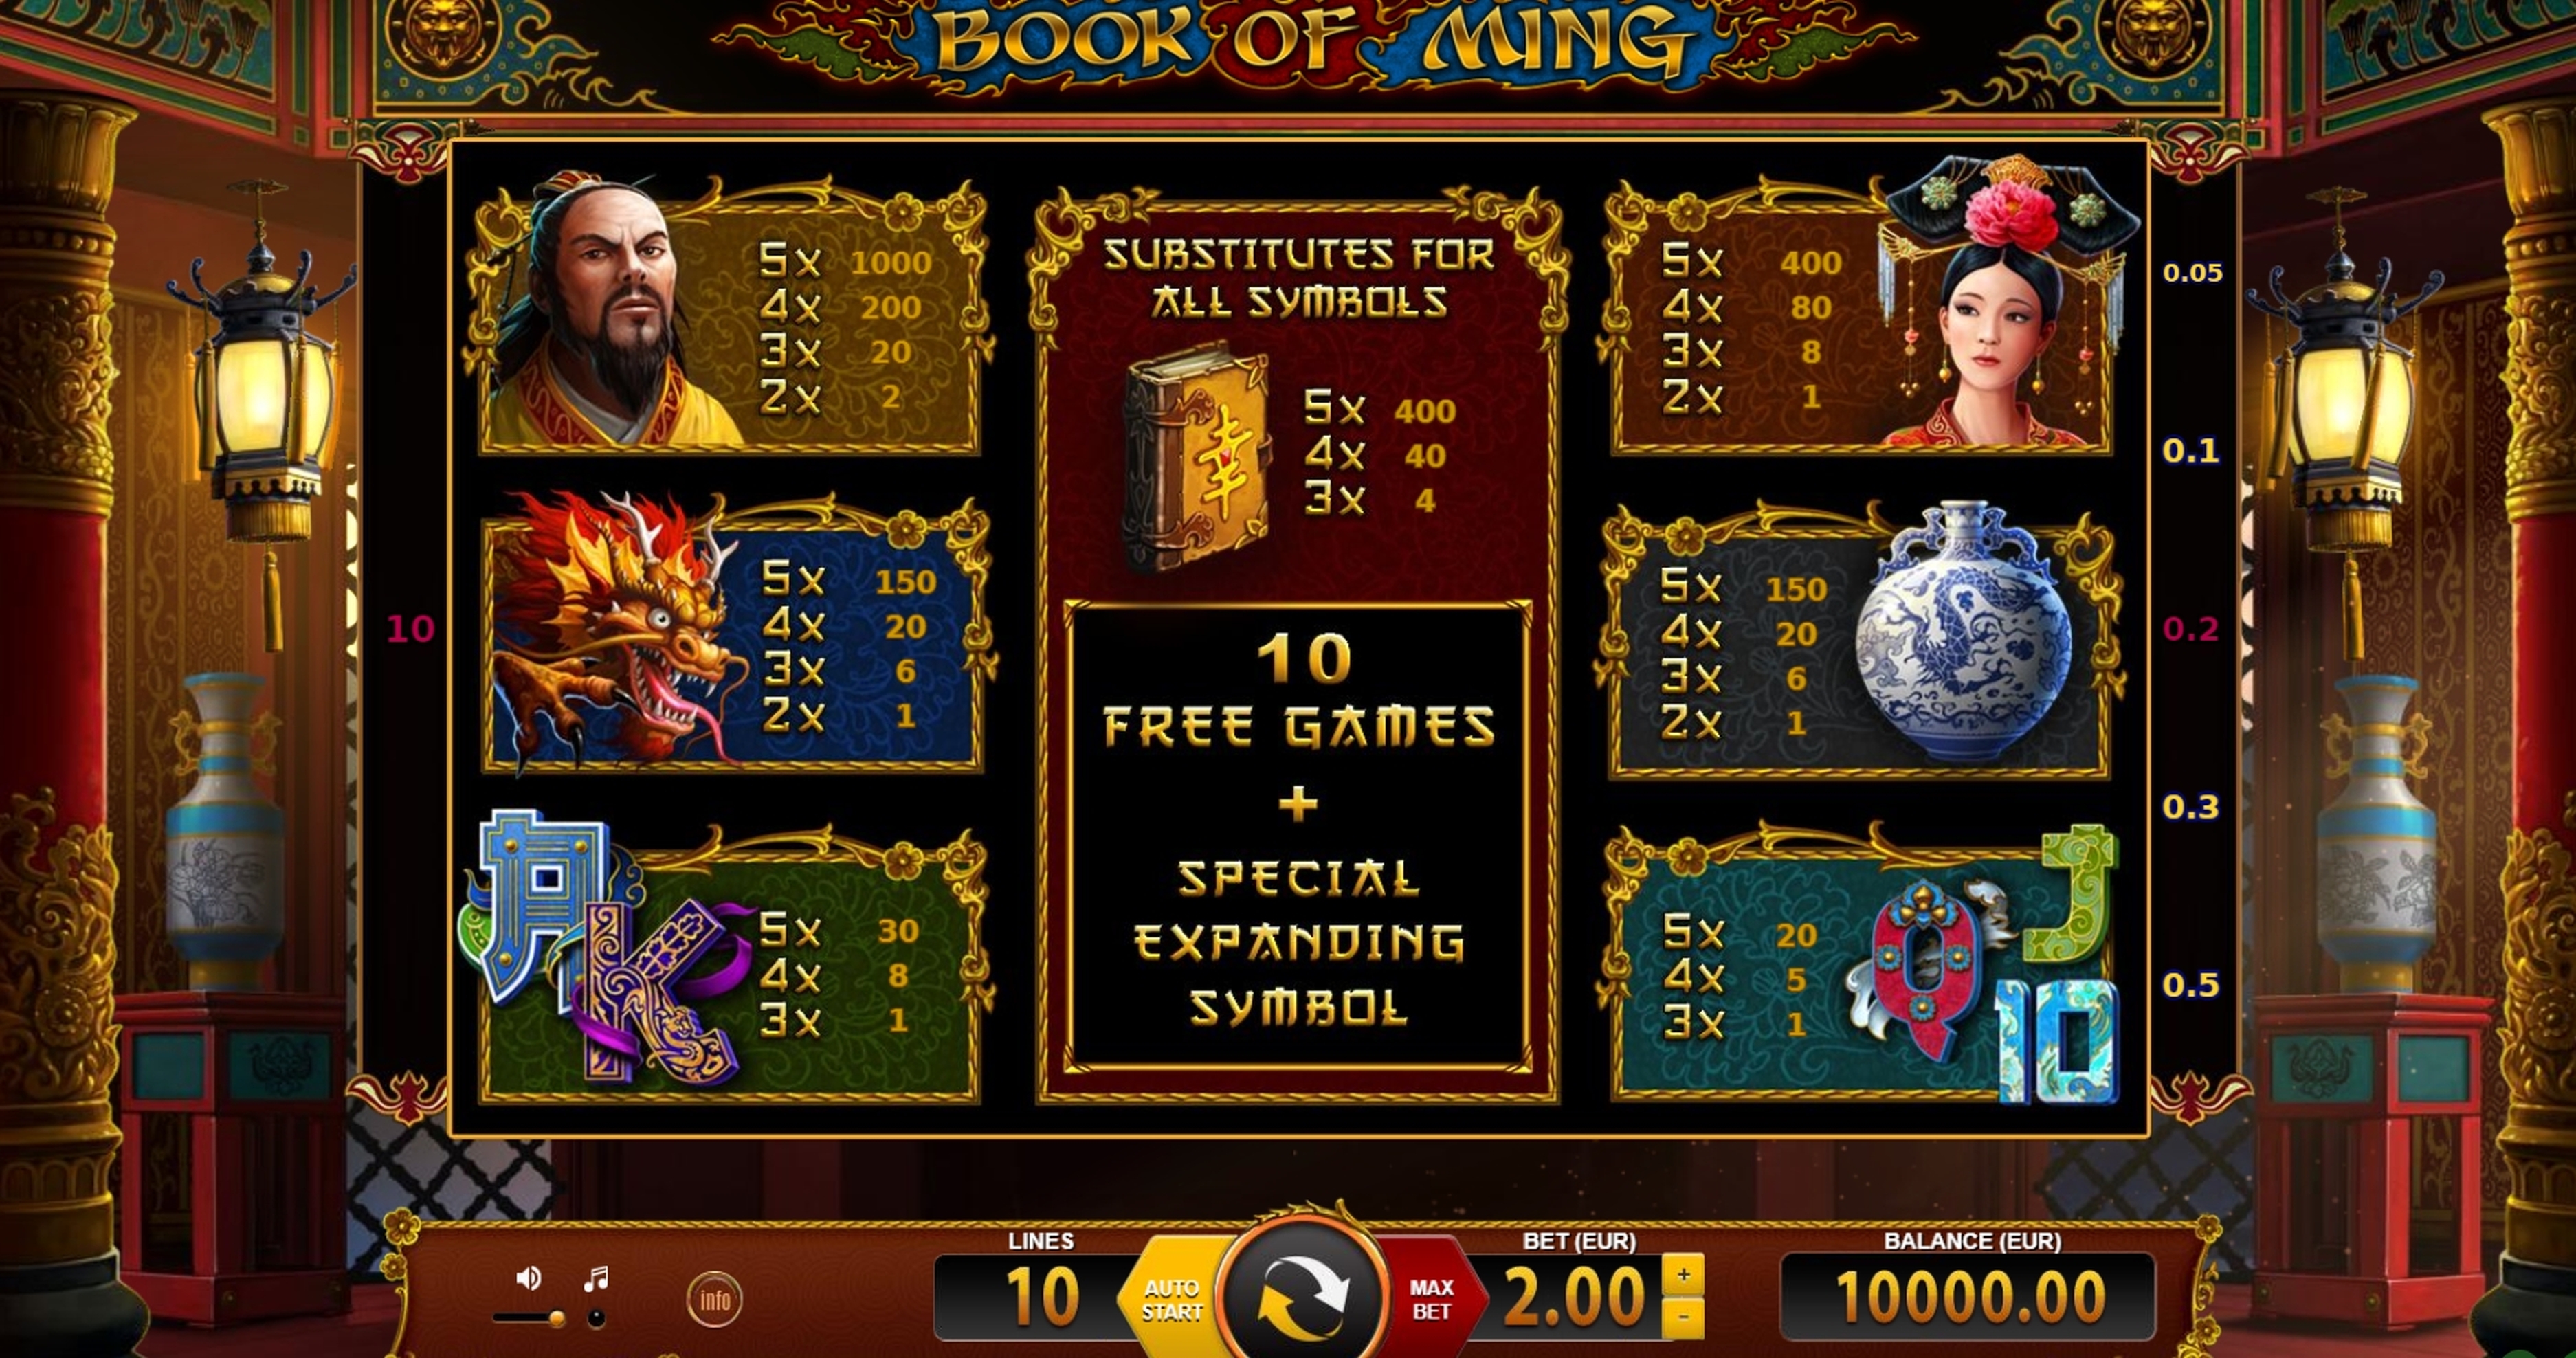 Info of Book of Ming Slot Game by BF Games